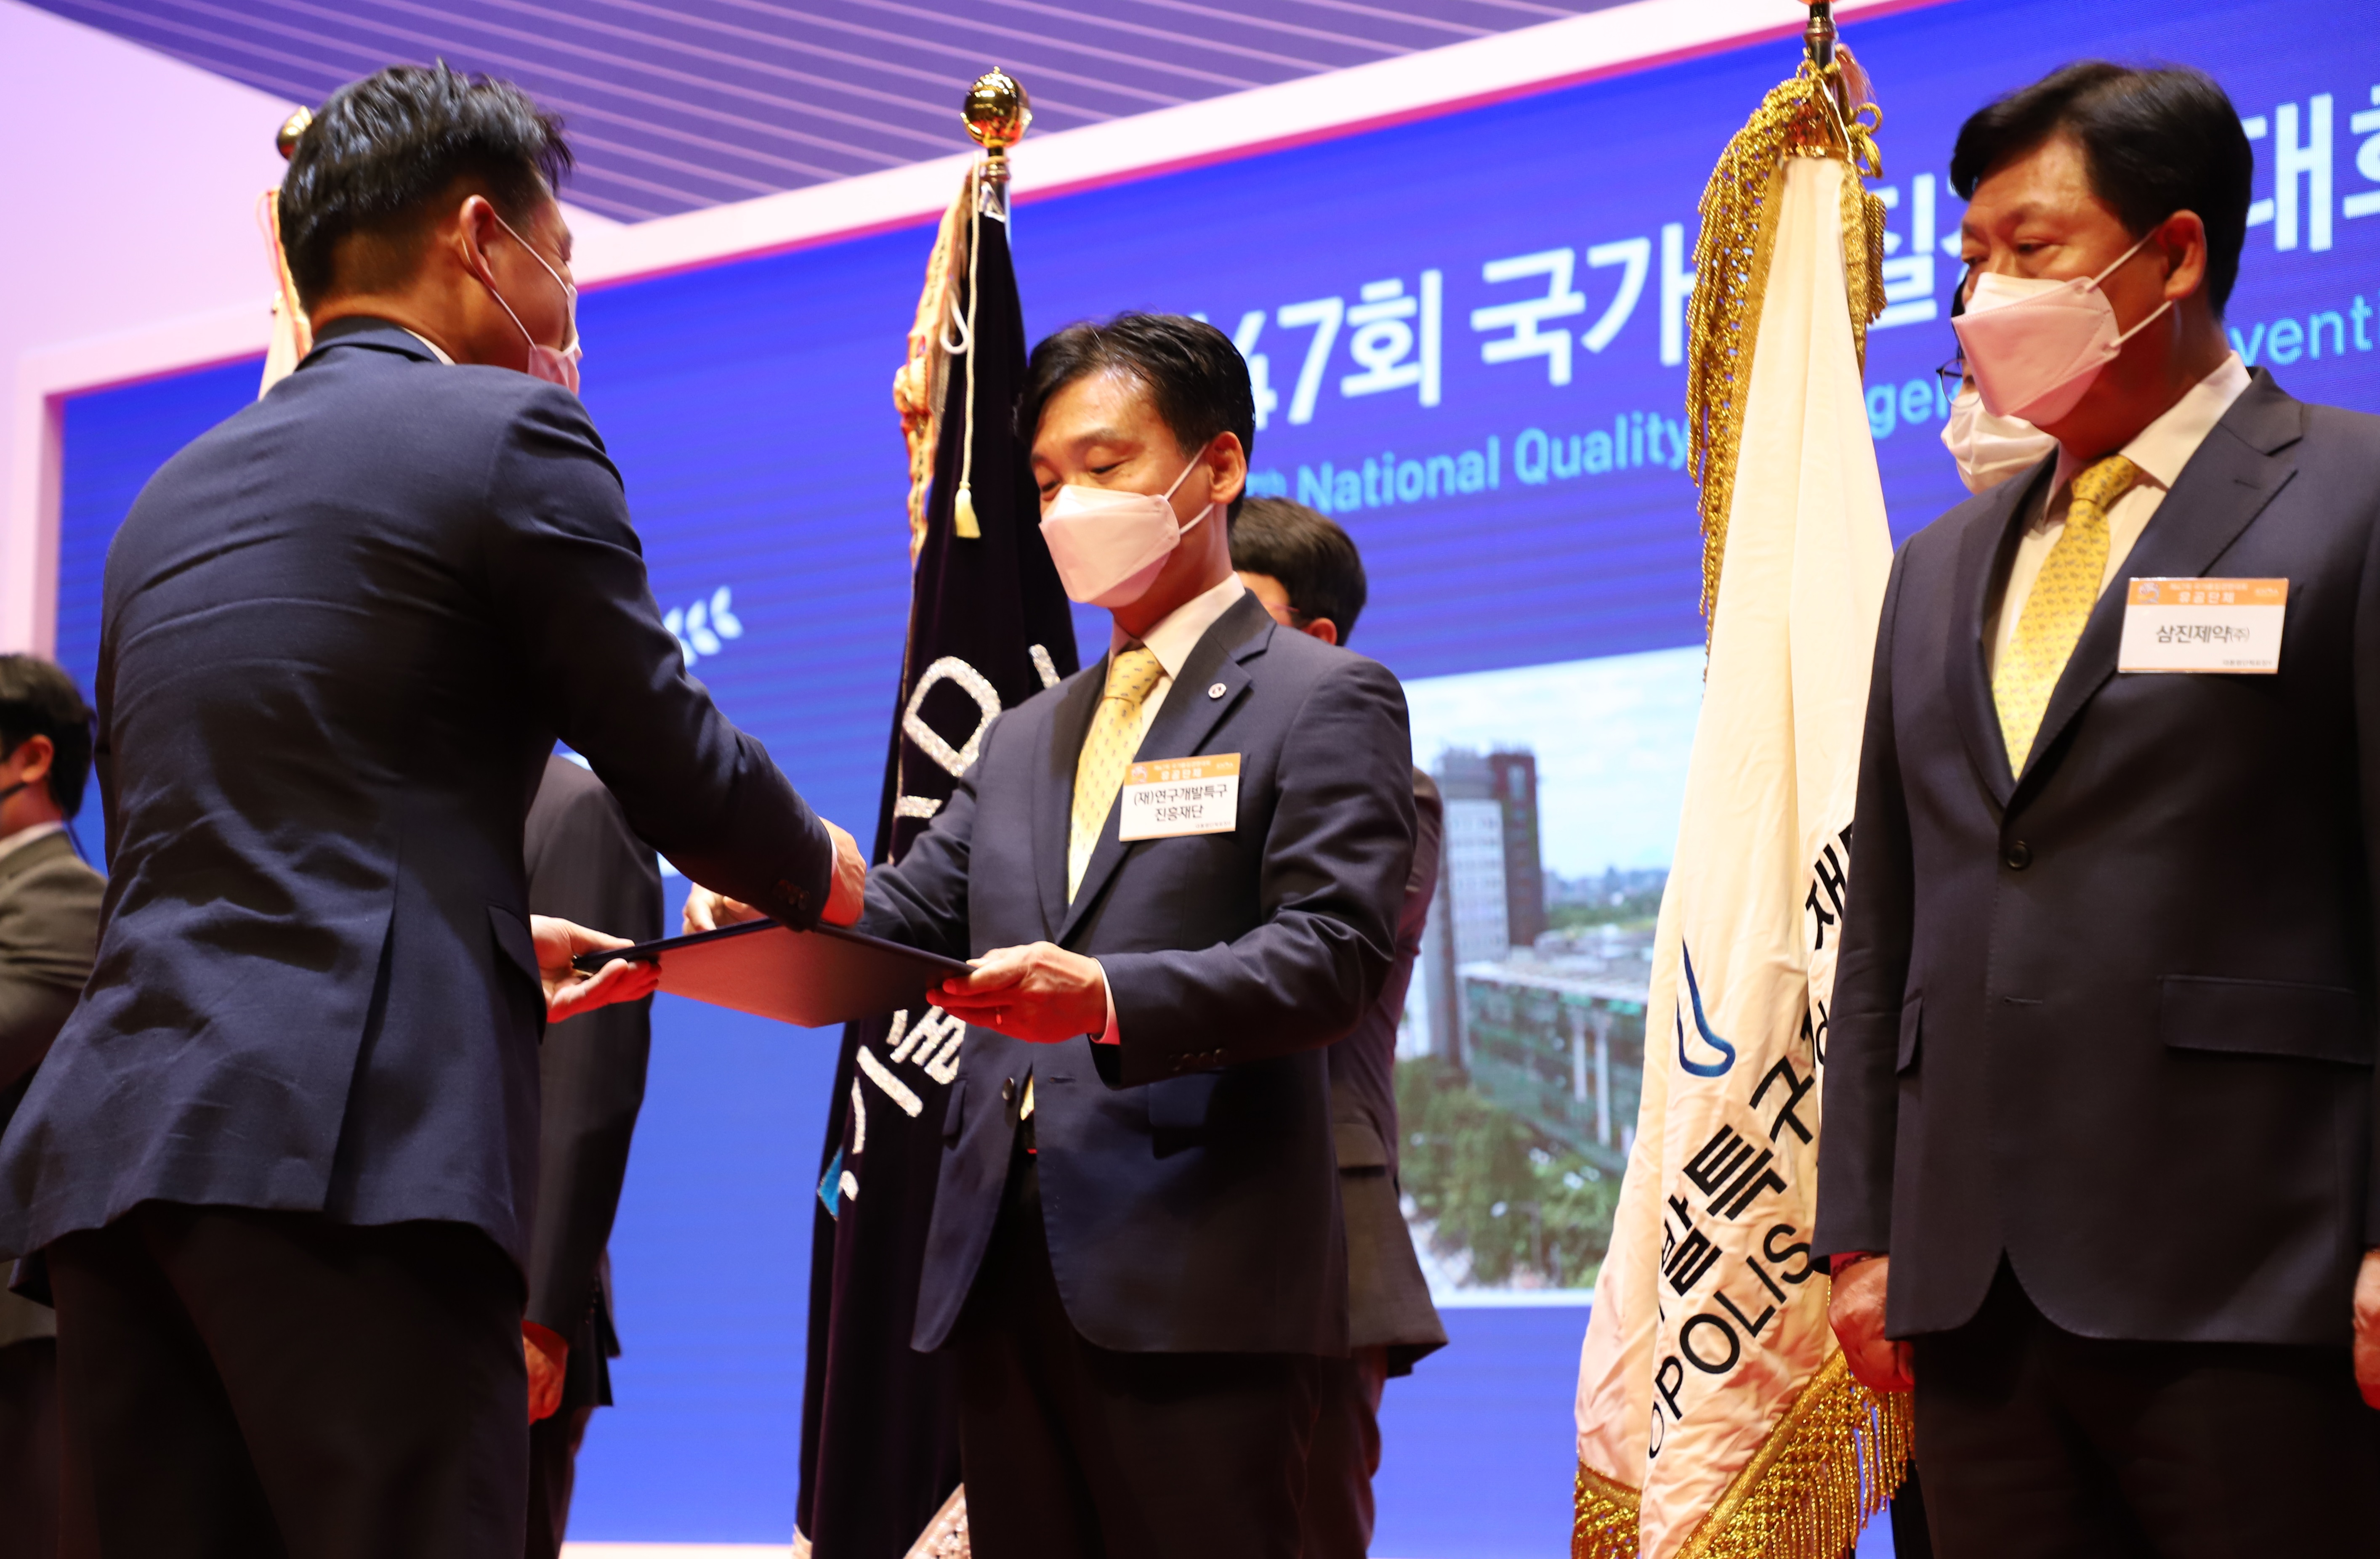 Korea Innovation Foundation won the Presidential Citation in the Human Resources Development category of the National Quality Innovation Award